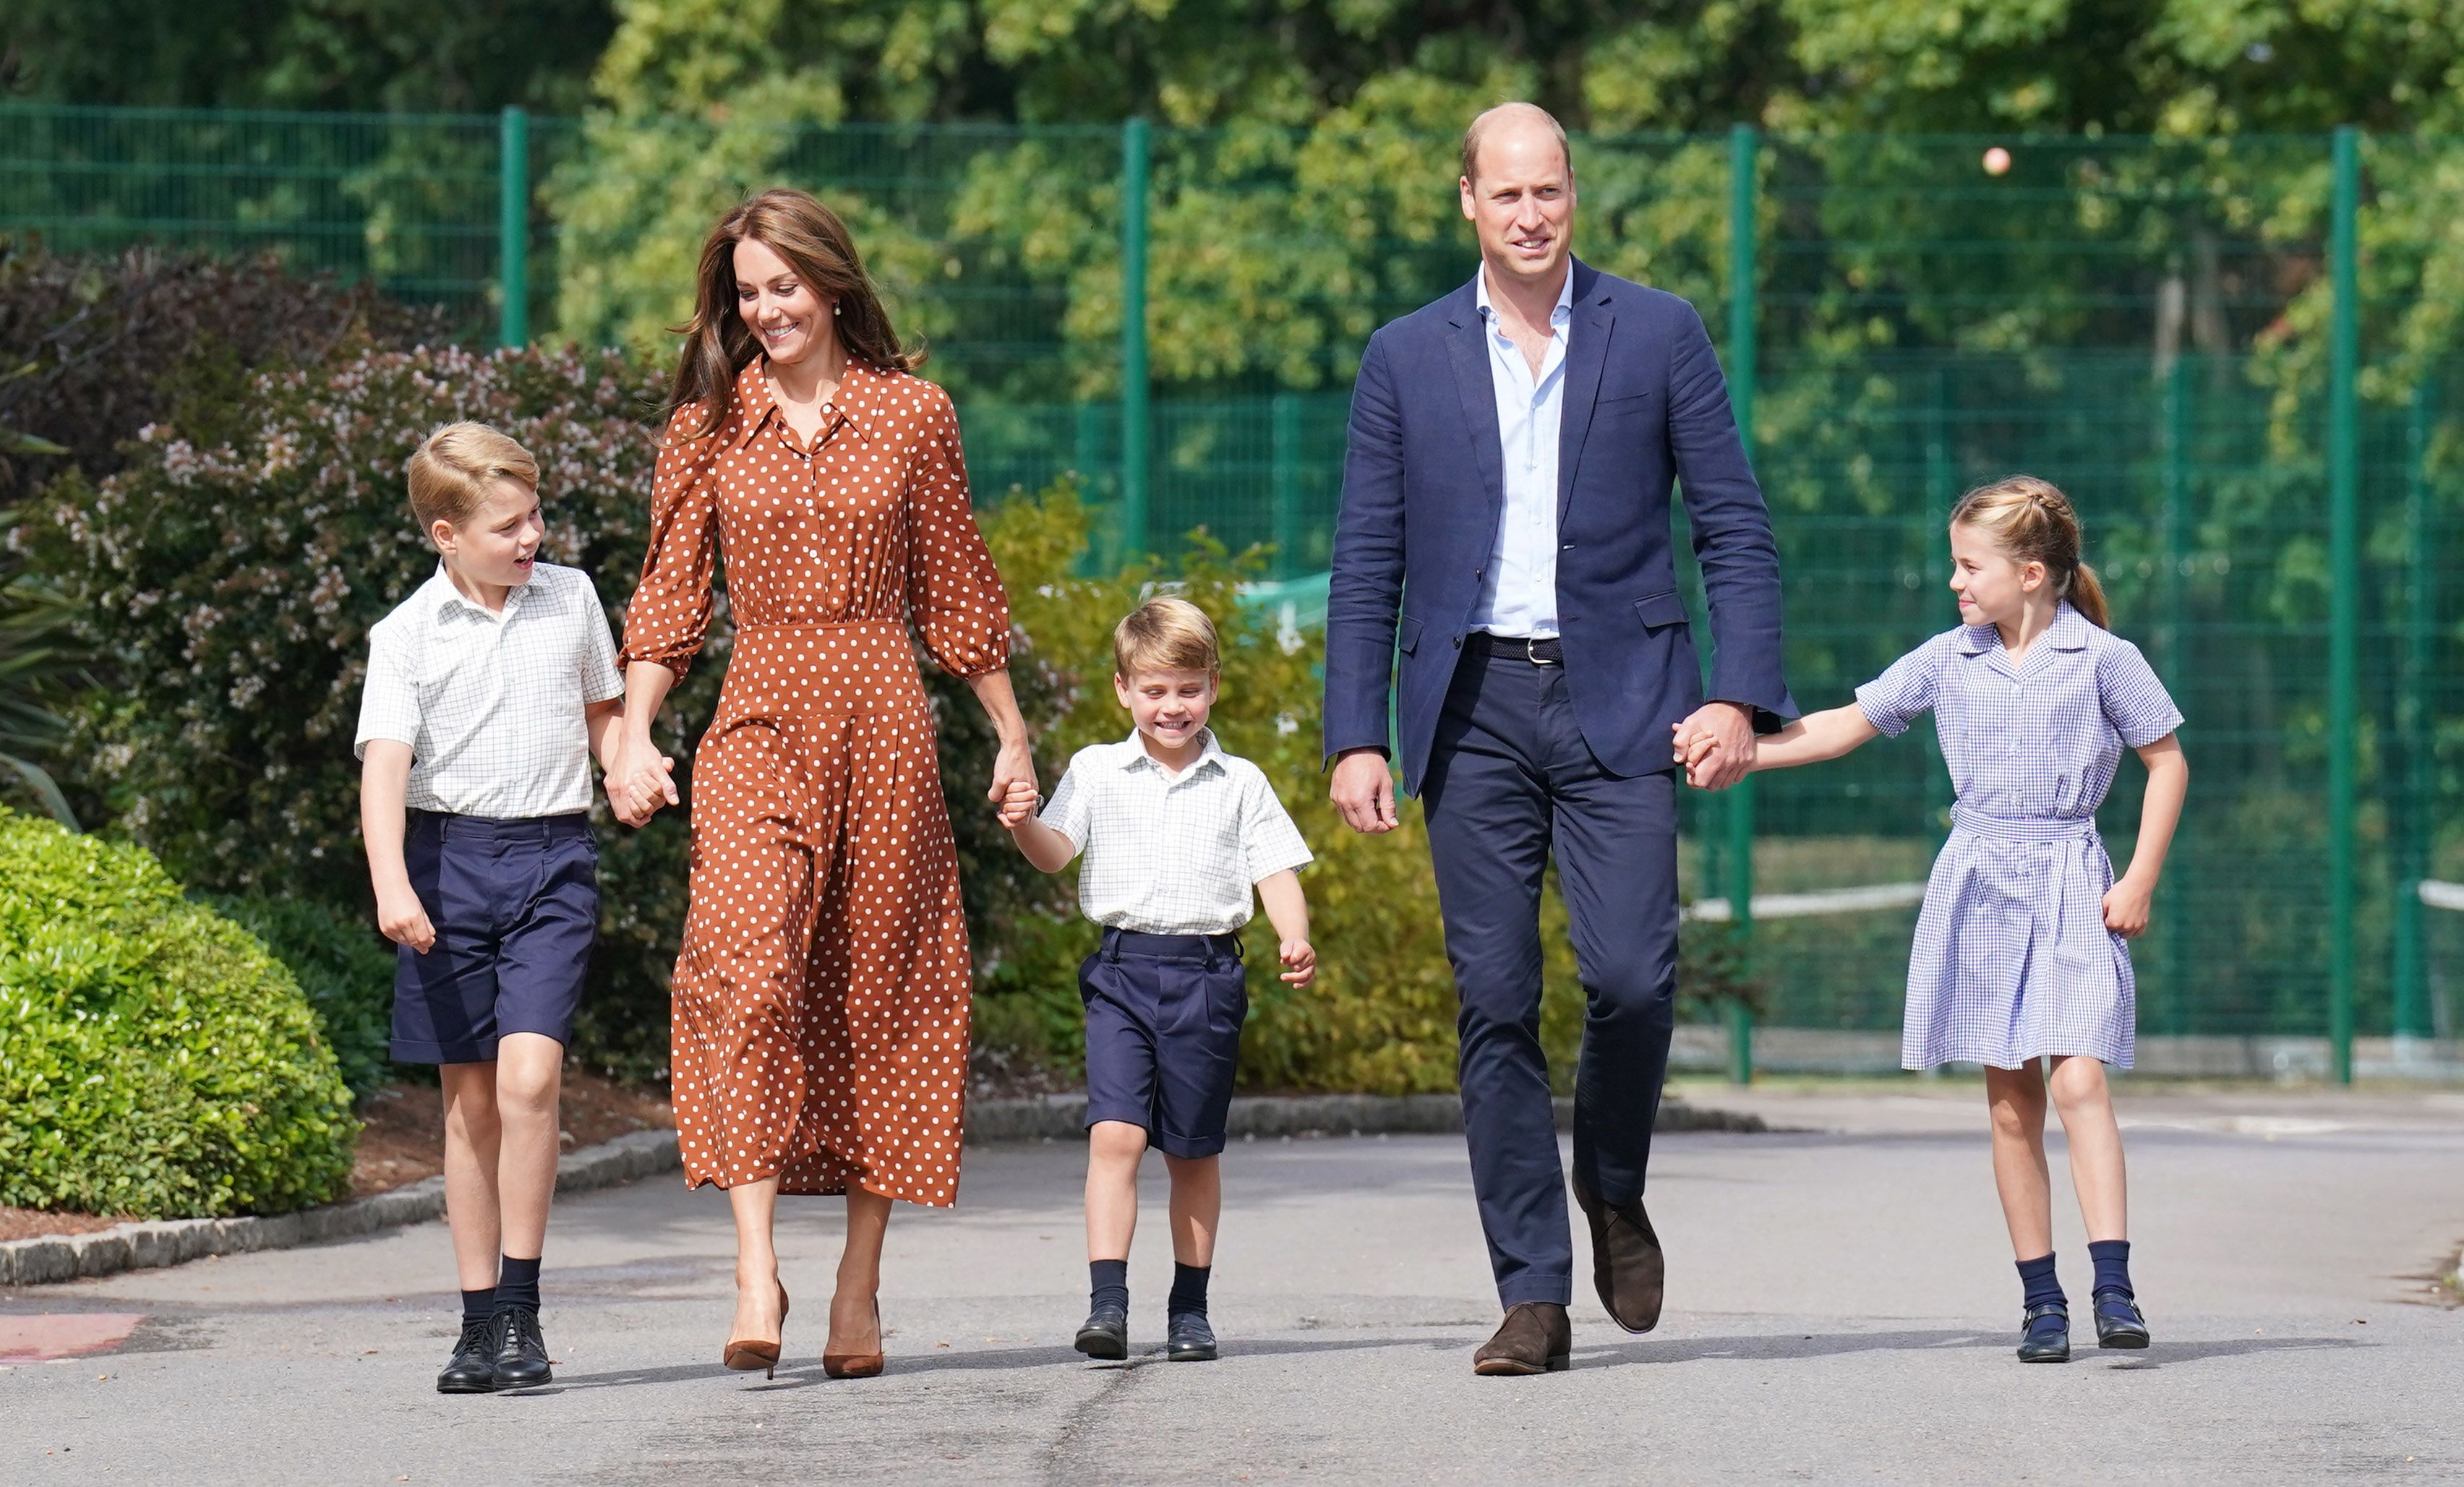 Lambrook School: Royal children George, Charlotte and Louis arrive for their first day | CNN